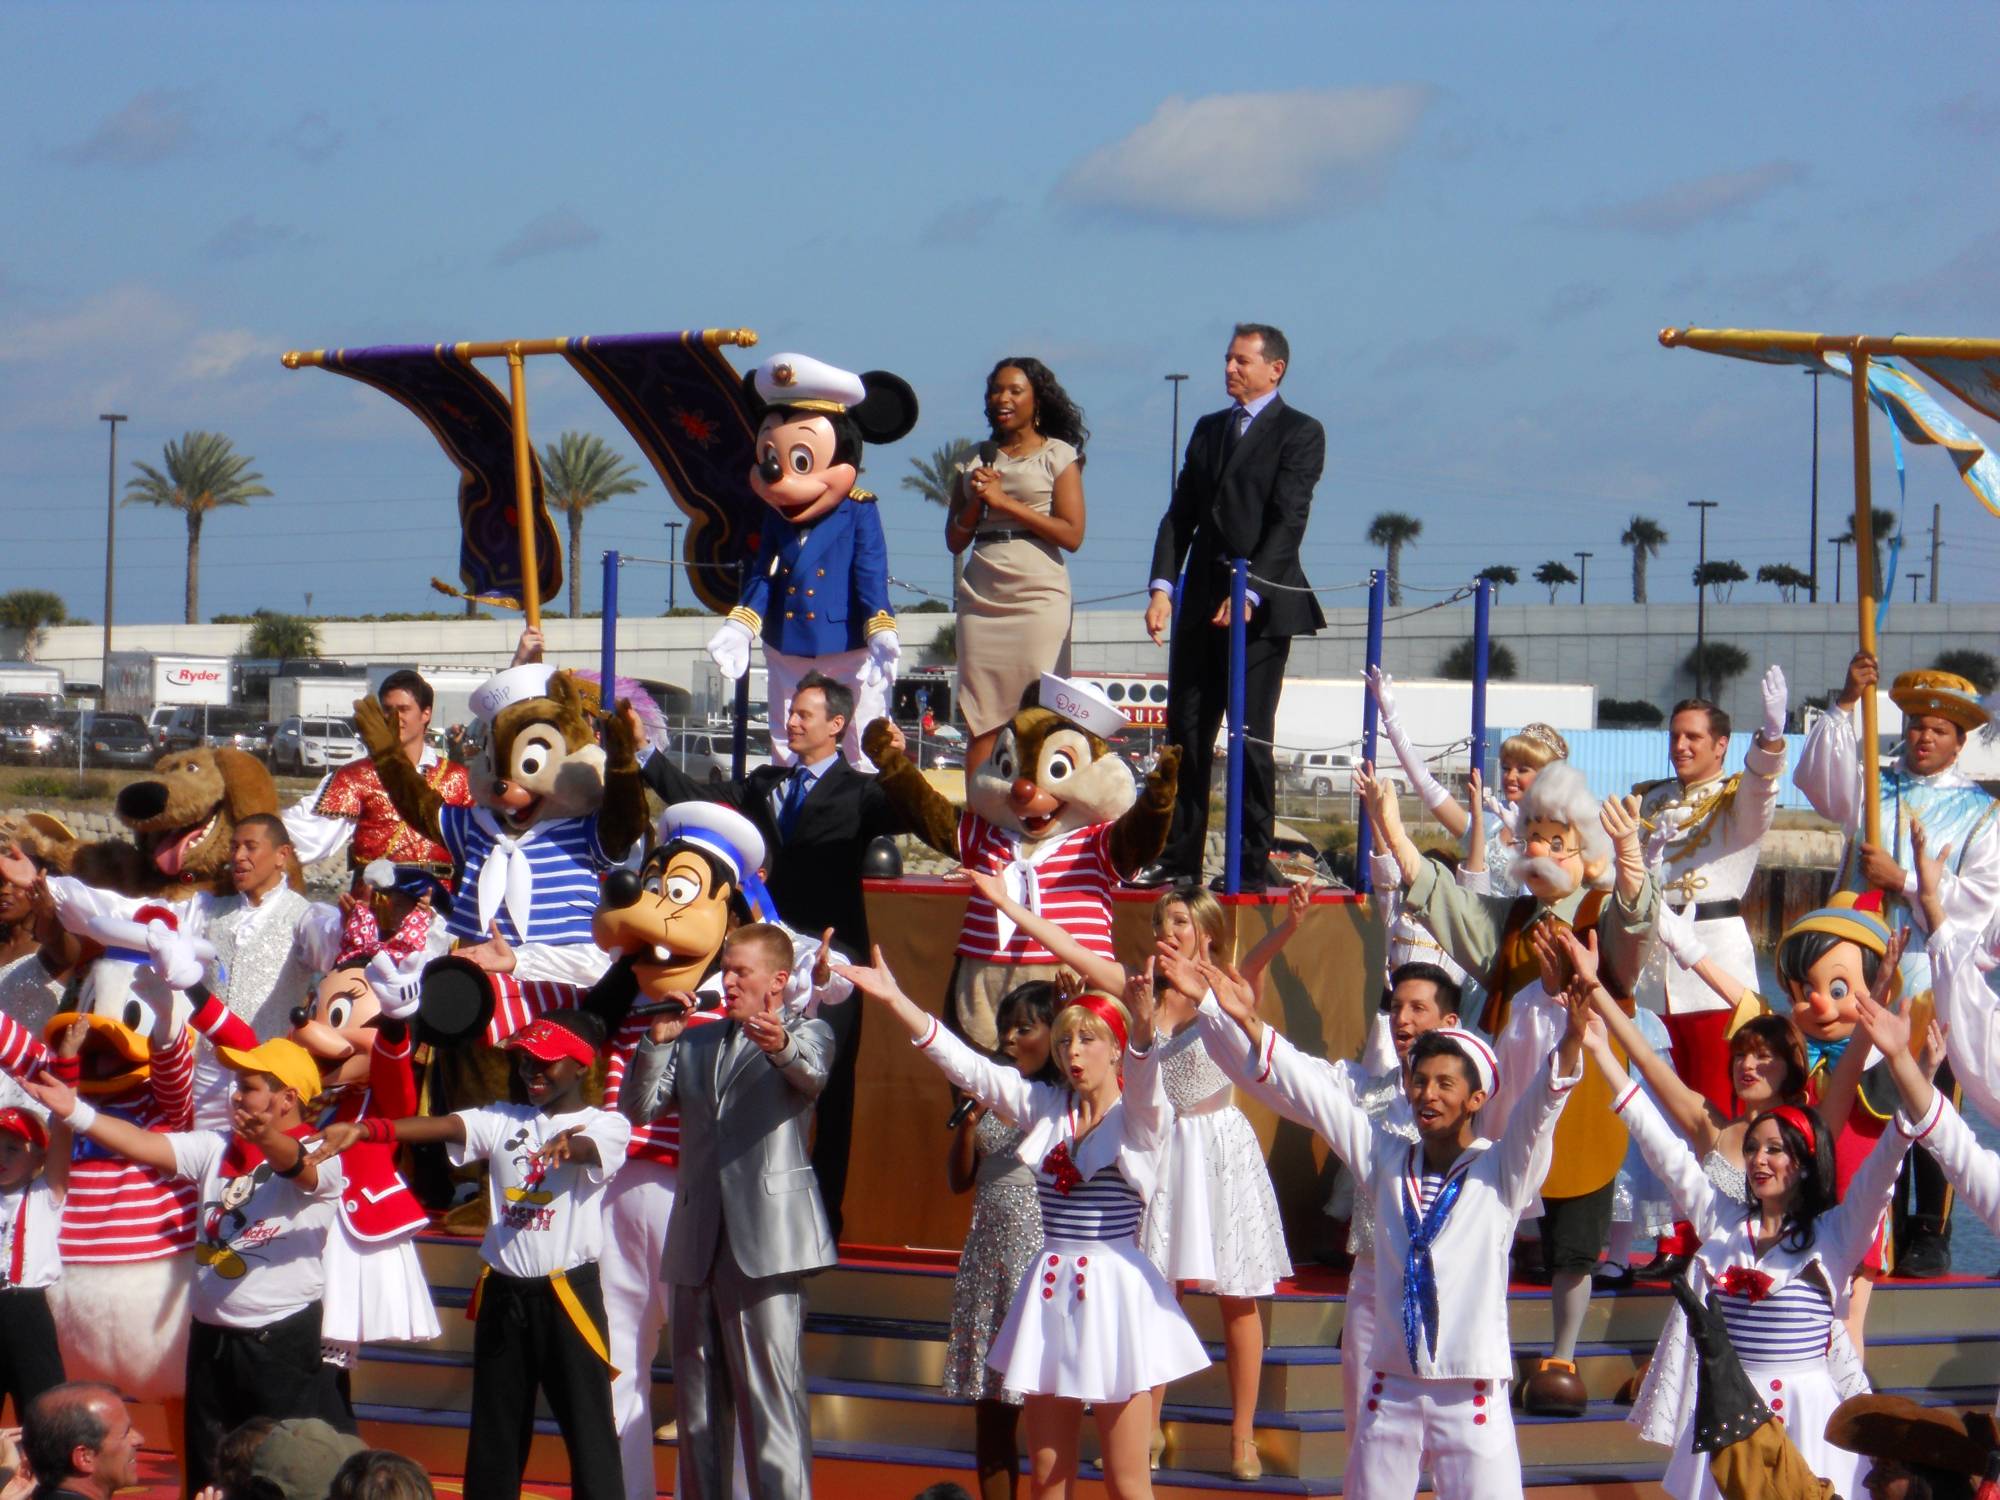 Learn more about the Disney Cruise Line's newest ship! |PassPorter.com